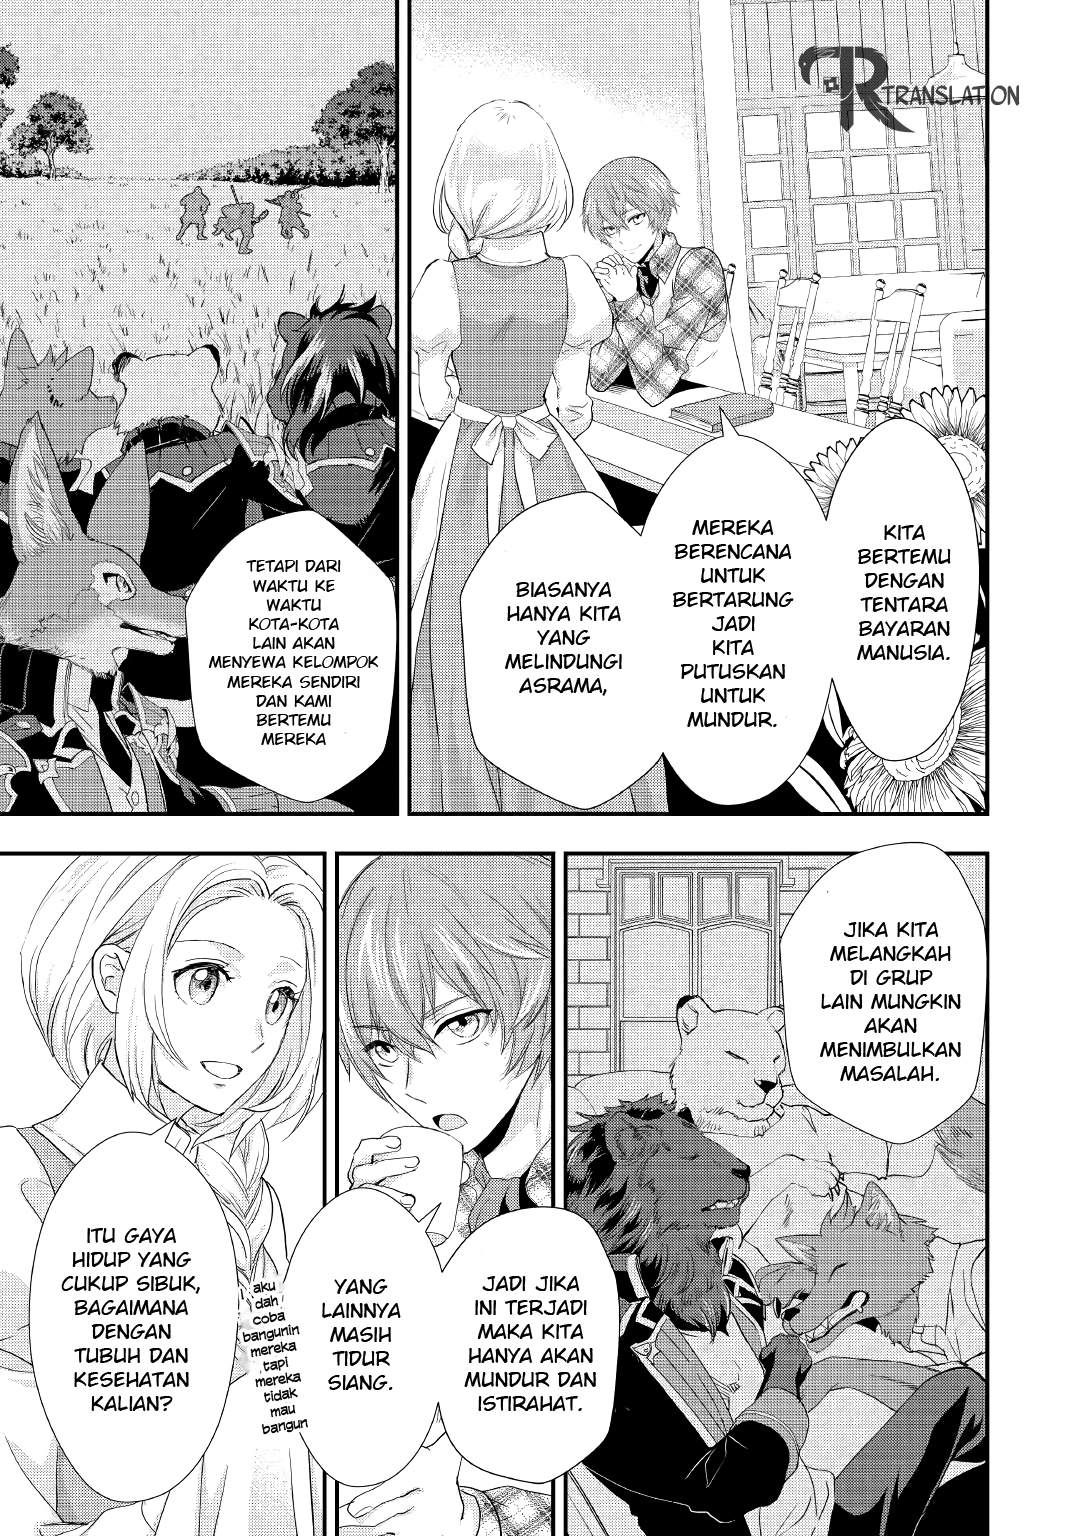 Milady Just Wants to Relax Chapter 012